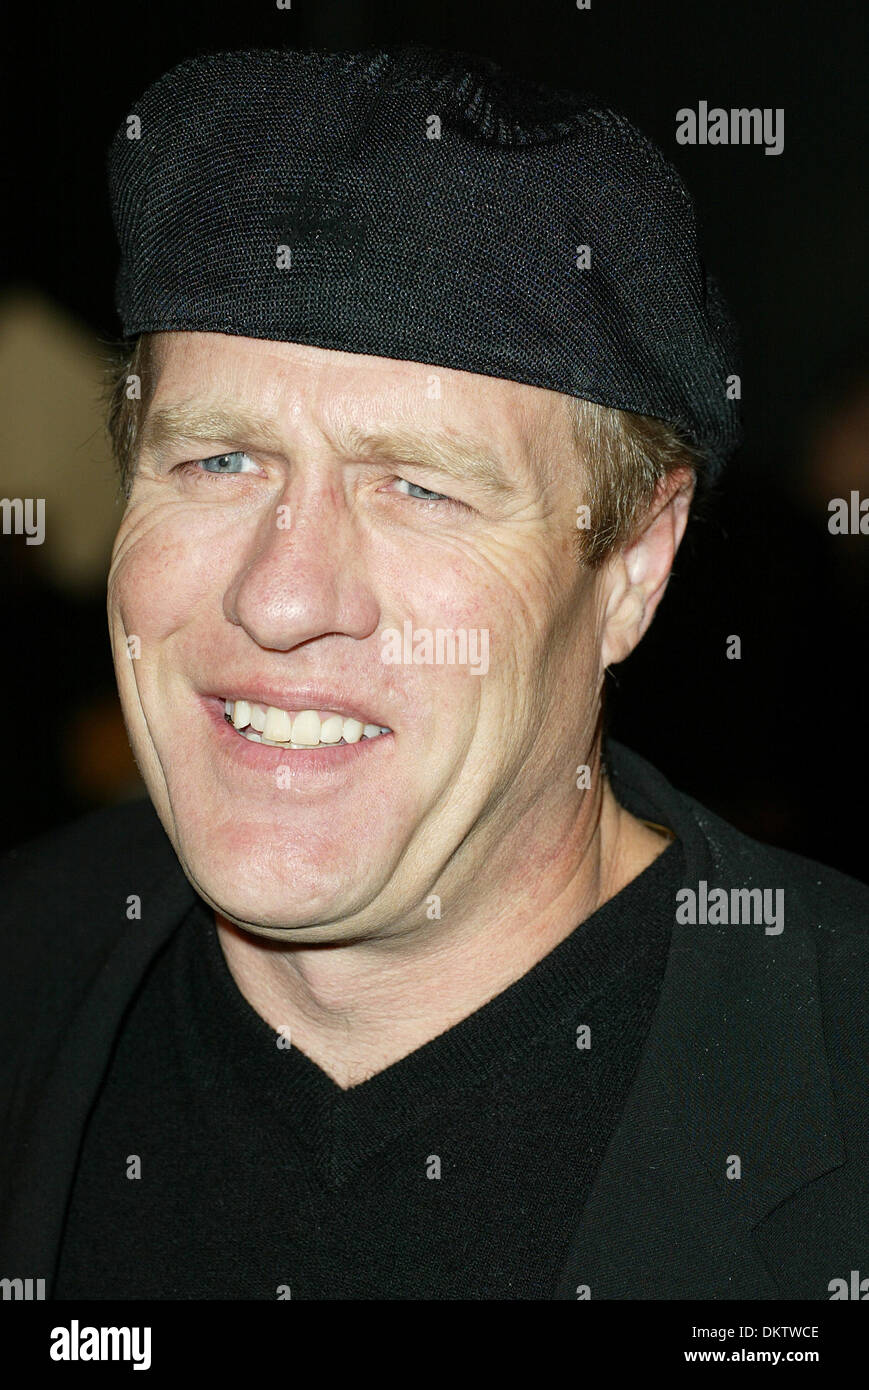 GREGG HENRY.ACTOR.ANGELES, USA.CINERAMA DOME, HOLLYWOOD, LOS.04/11/2002.LAC10593. Stock Photo